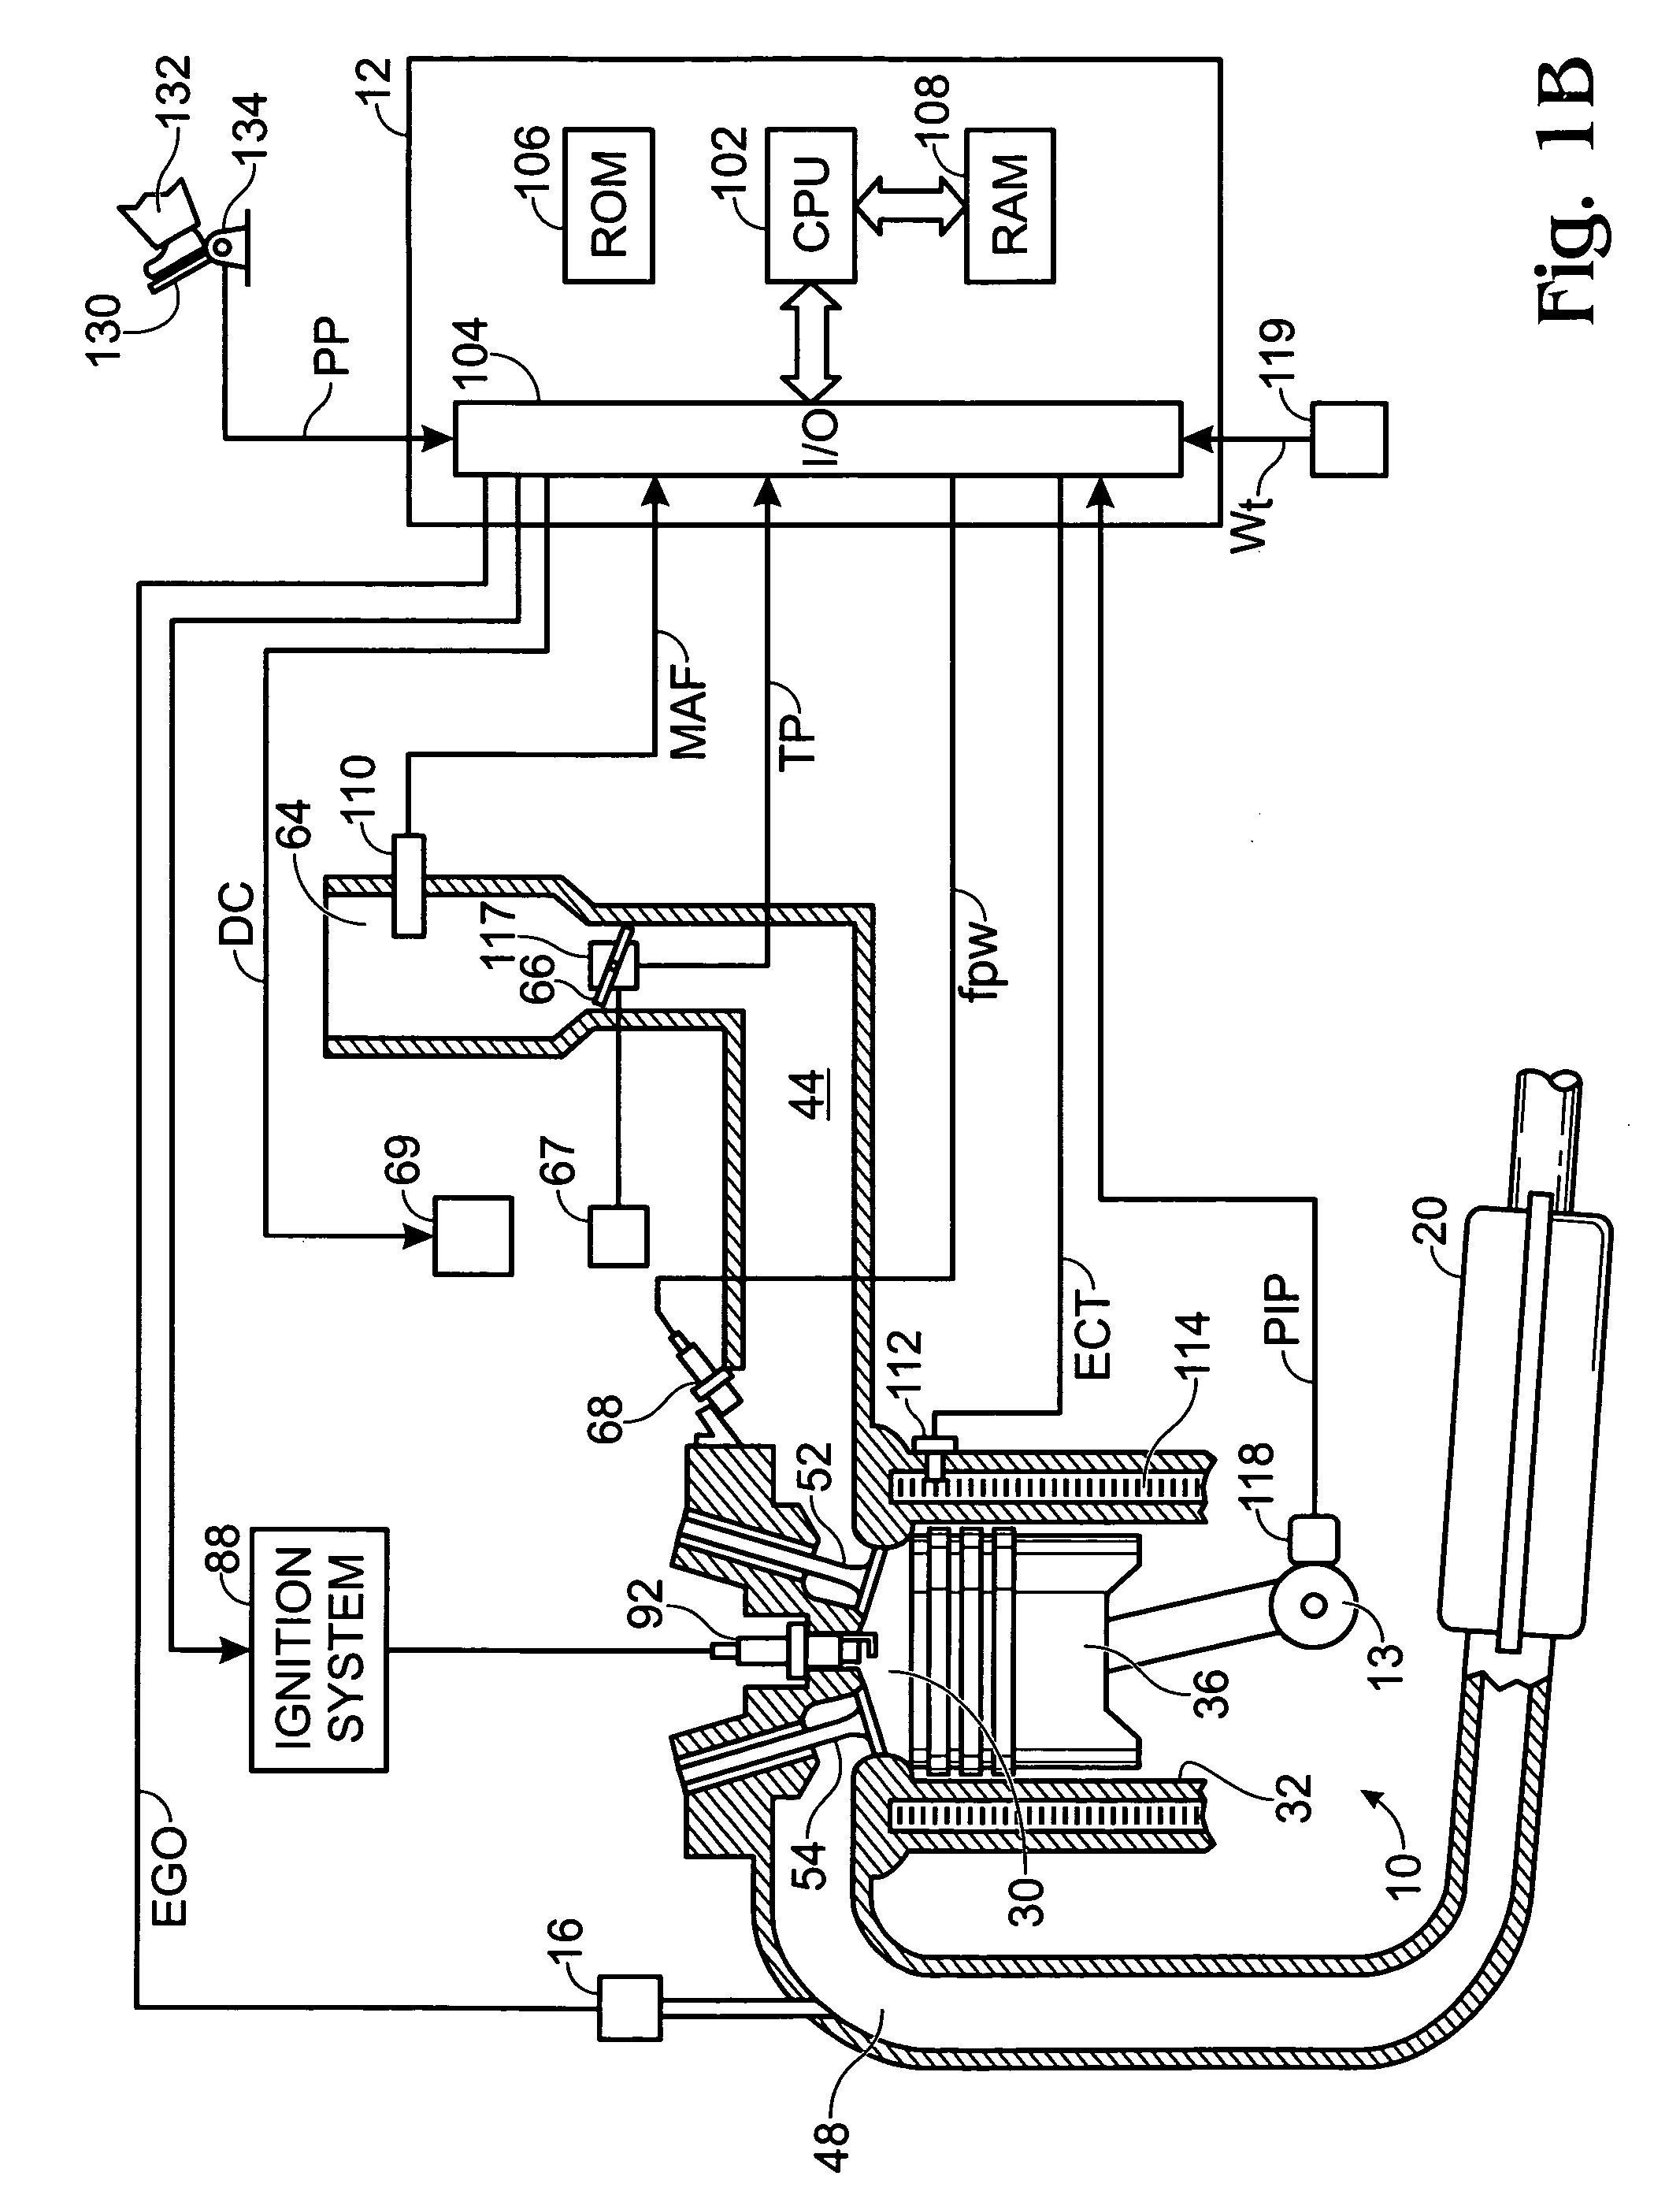 Computer device to control operation during catalyst desulfurization to preserve catalytic function